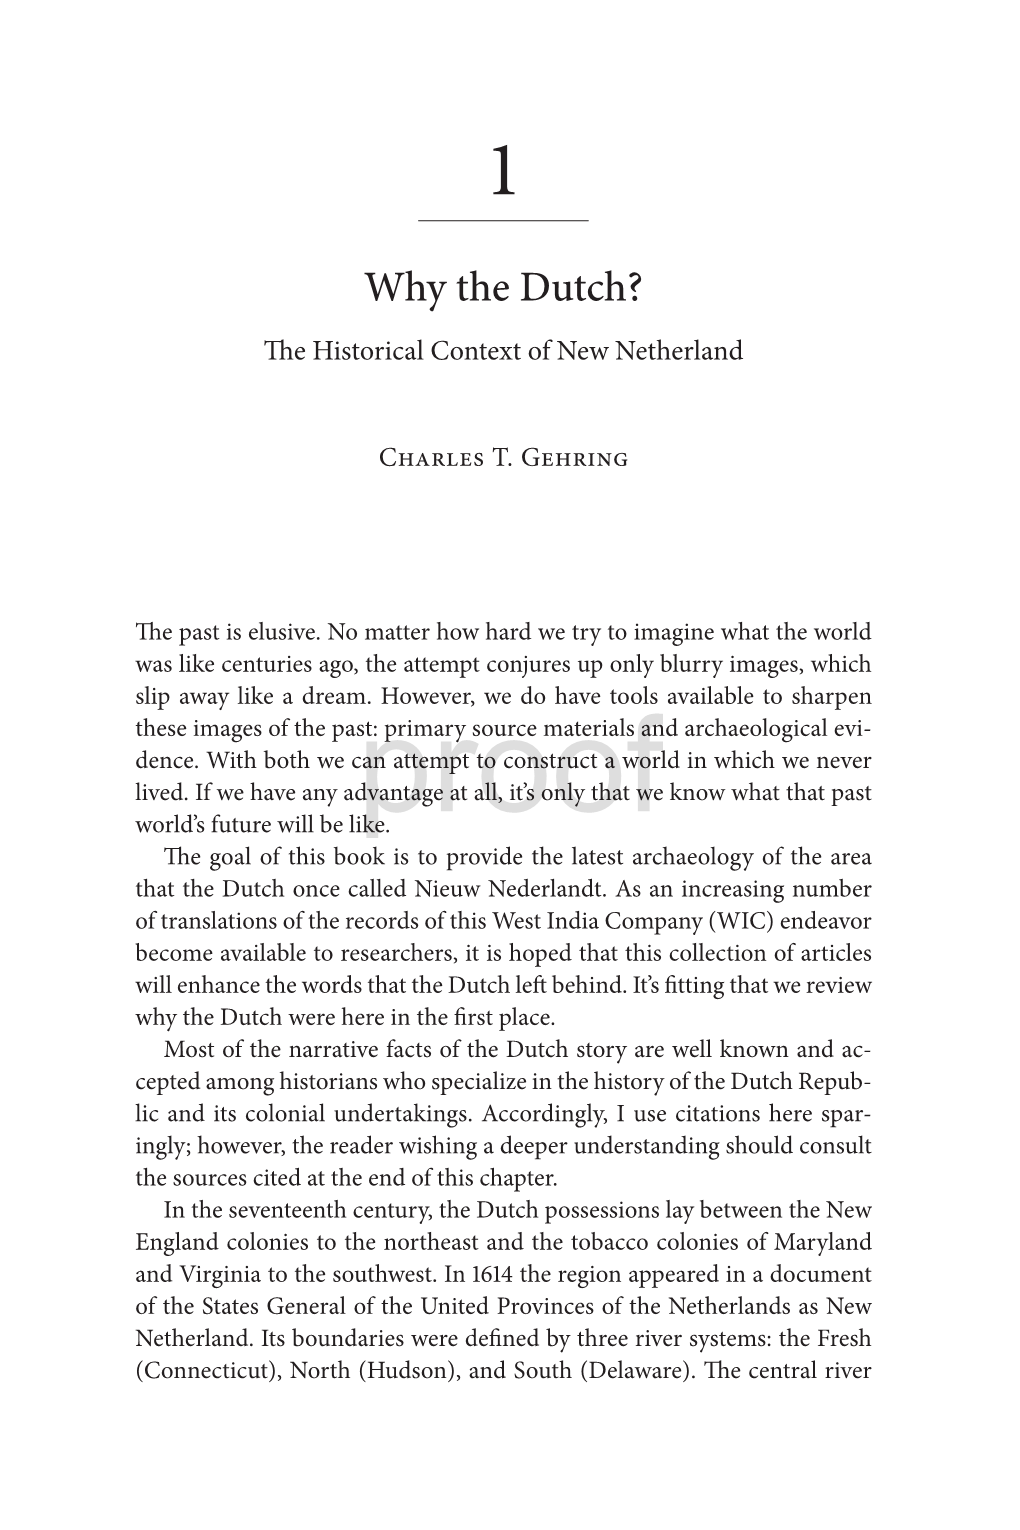 Why the Dutch? the Historical Context of New Netherland